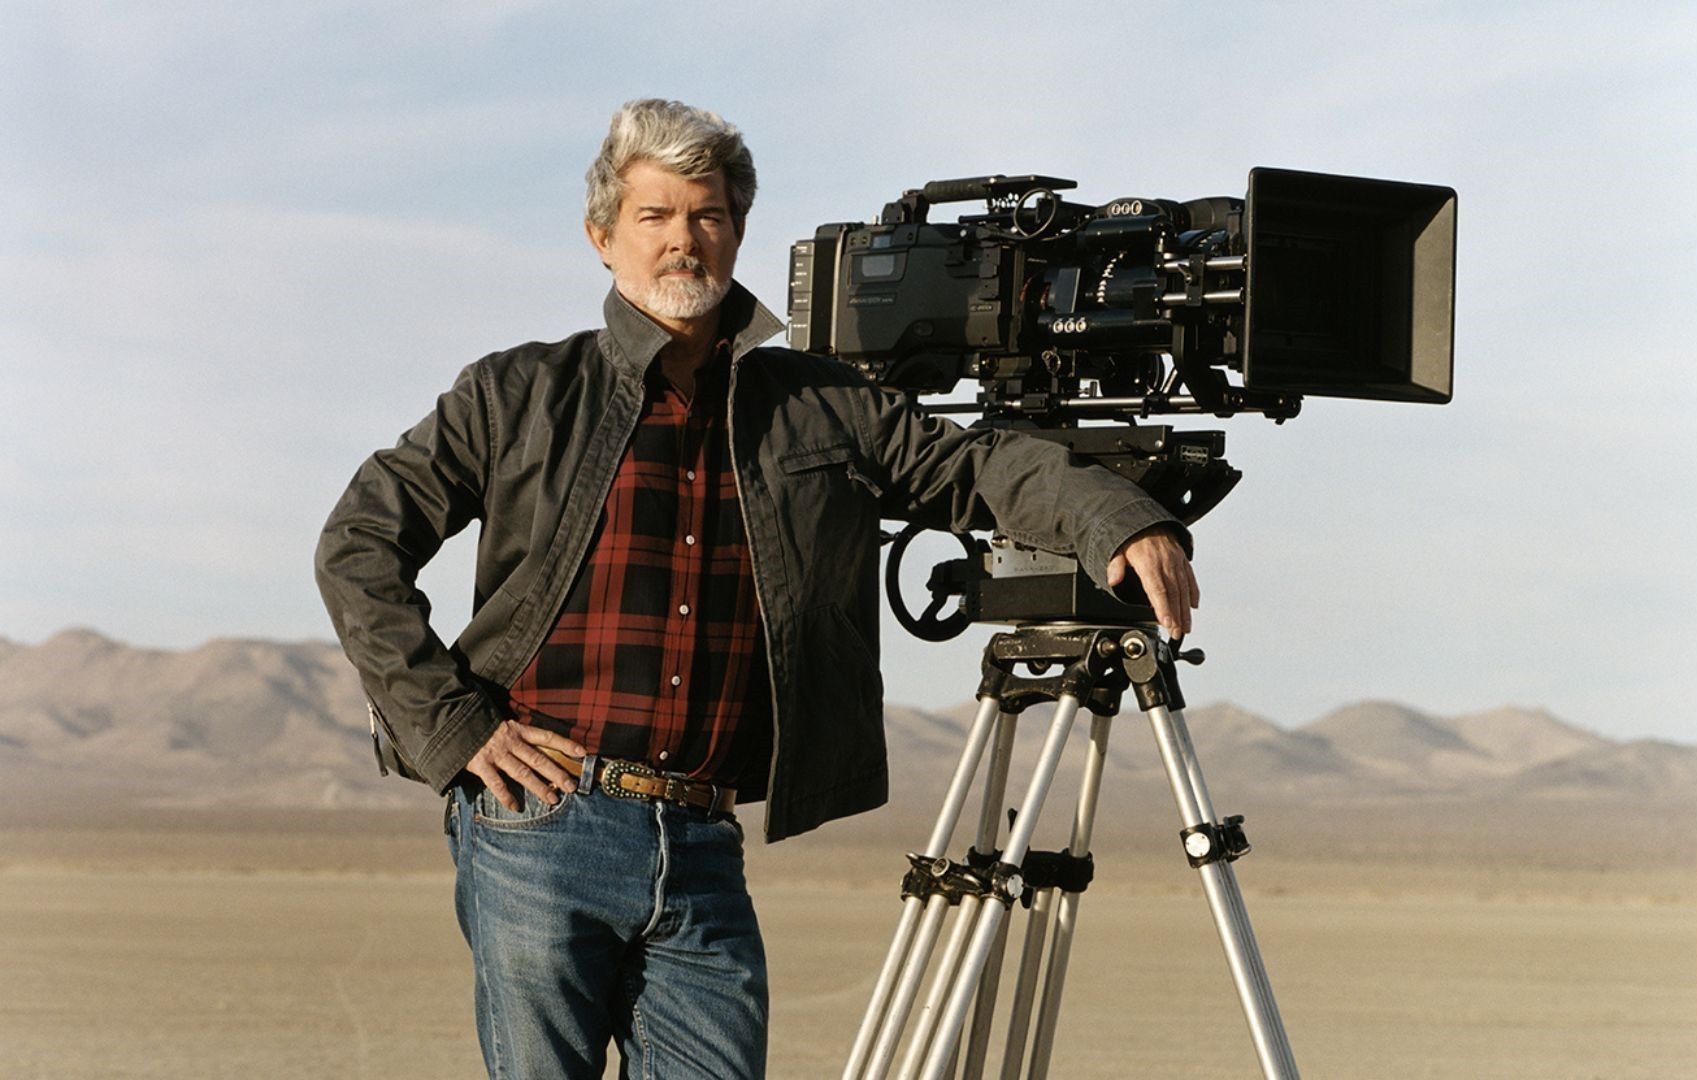 George Lucas receiving Honorary Palme d'Or at Cannes Film Festival